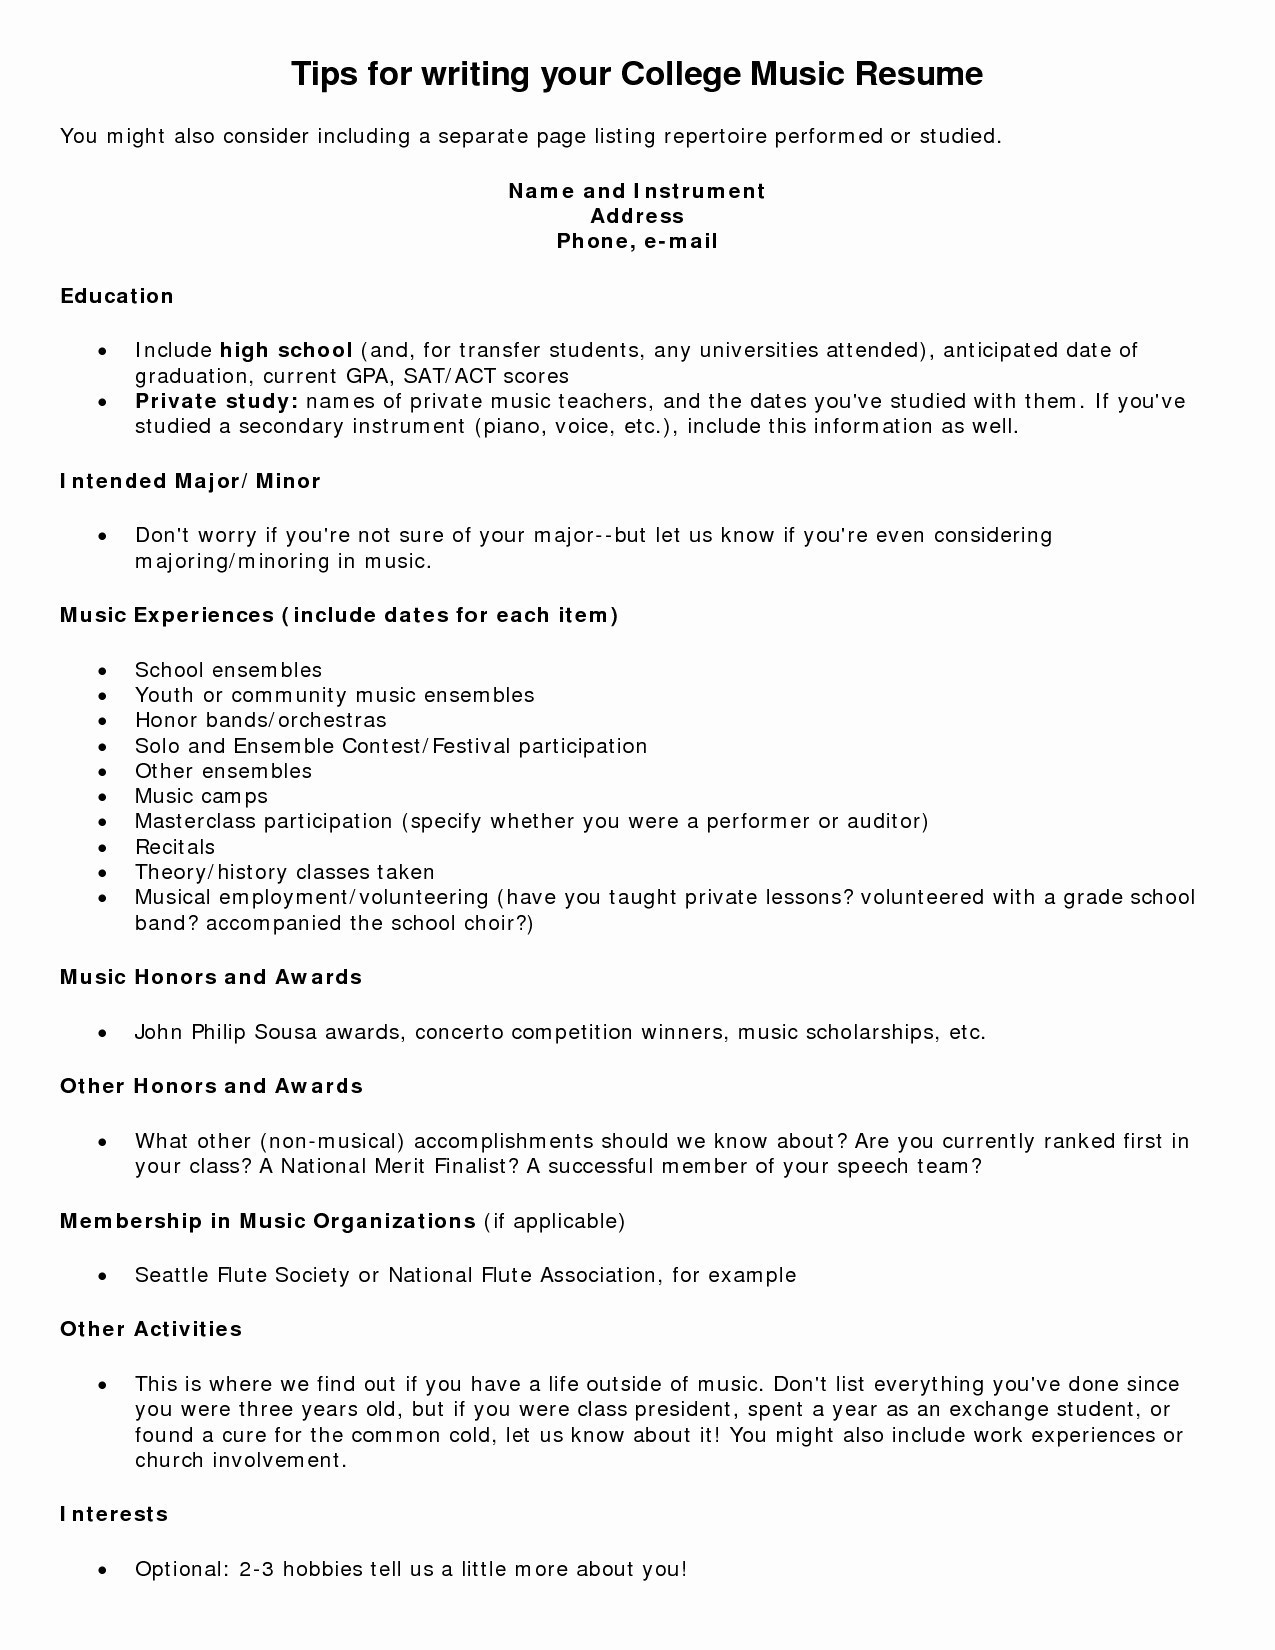 Resume and Cover Letter Template - Resume and Cover Letter Template Unique Lovely Letter Template Fresh